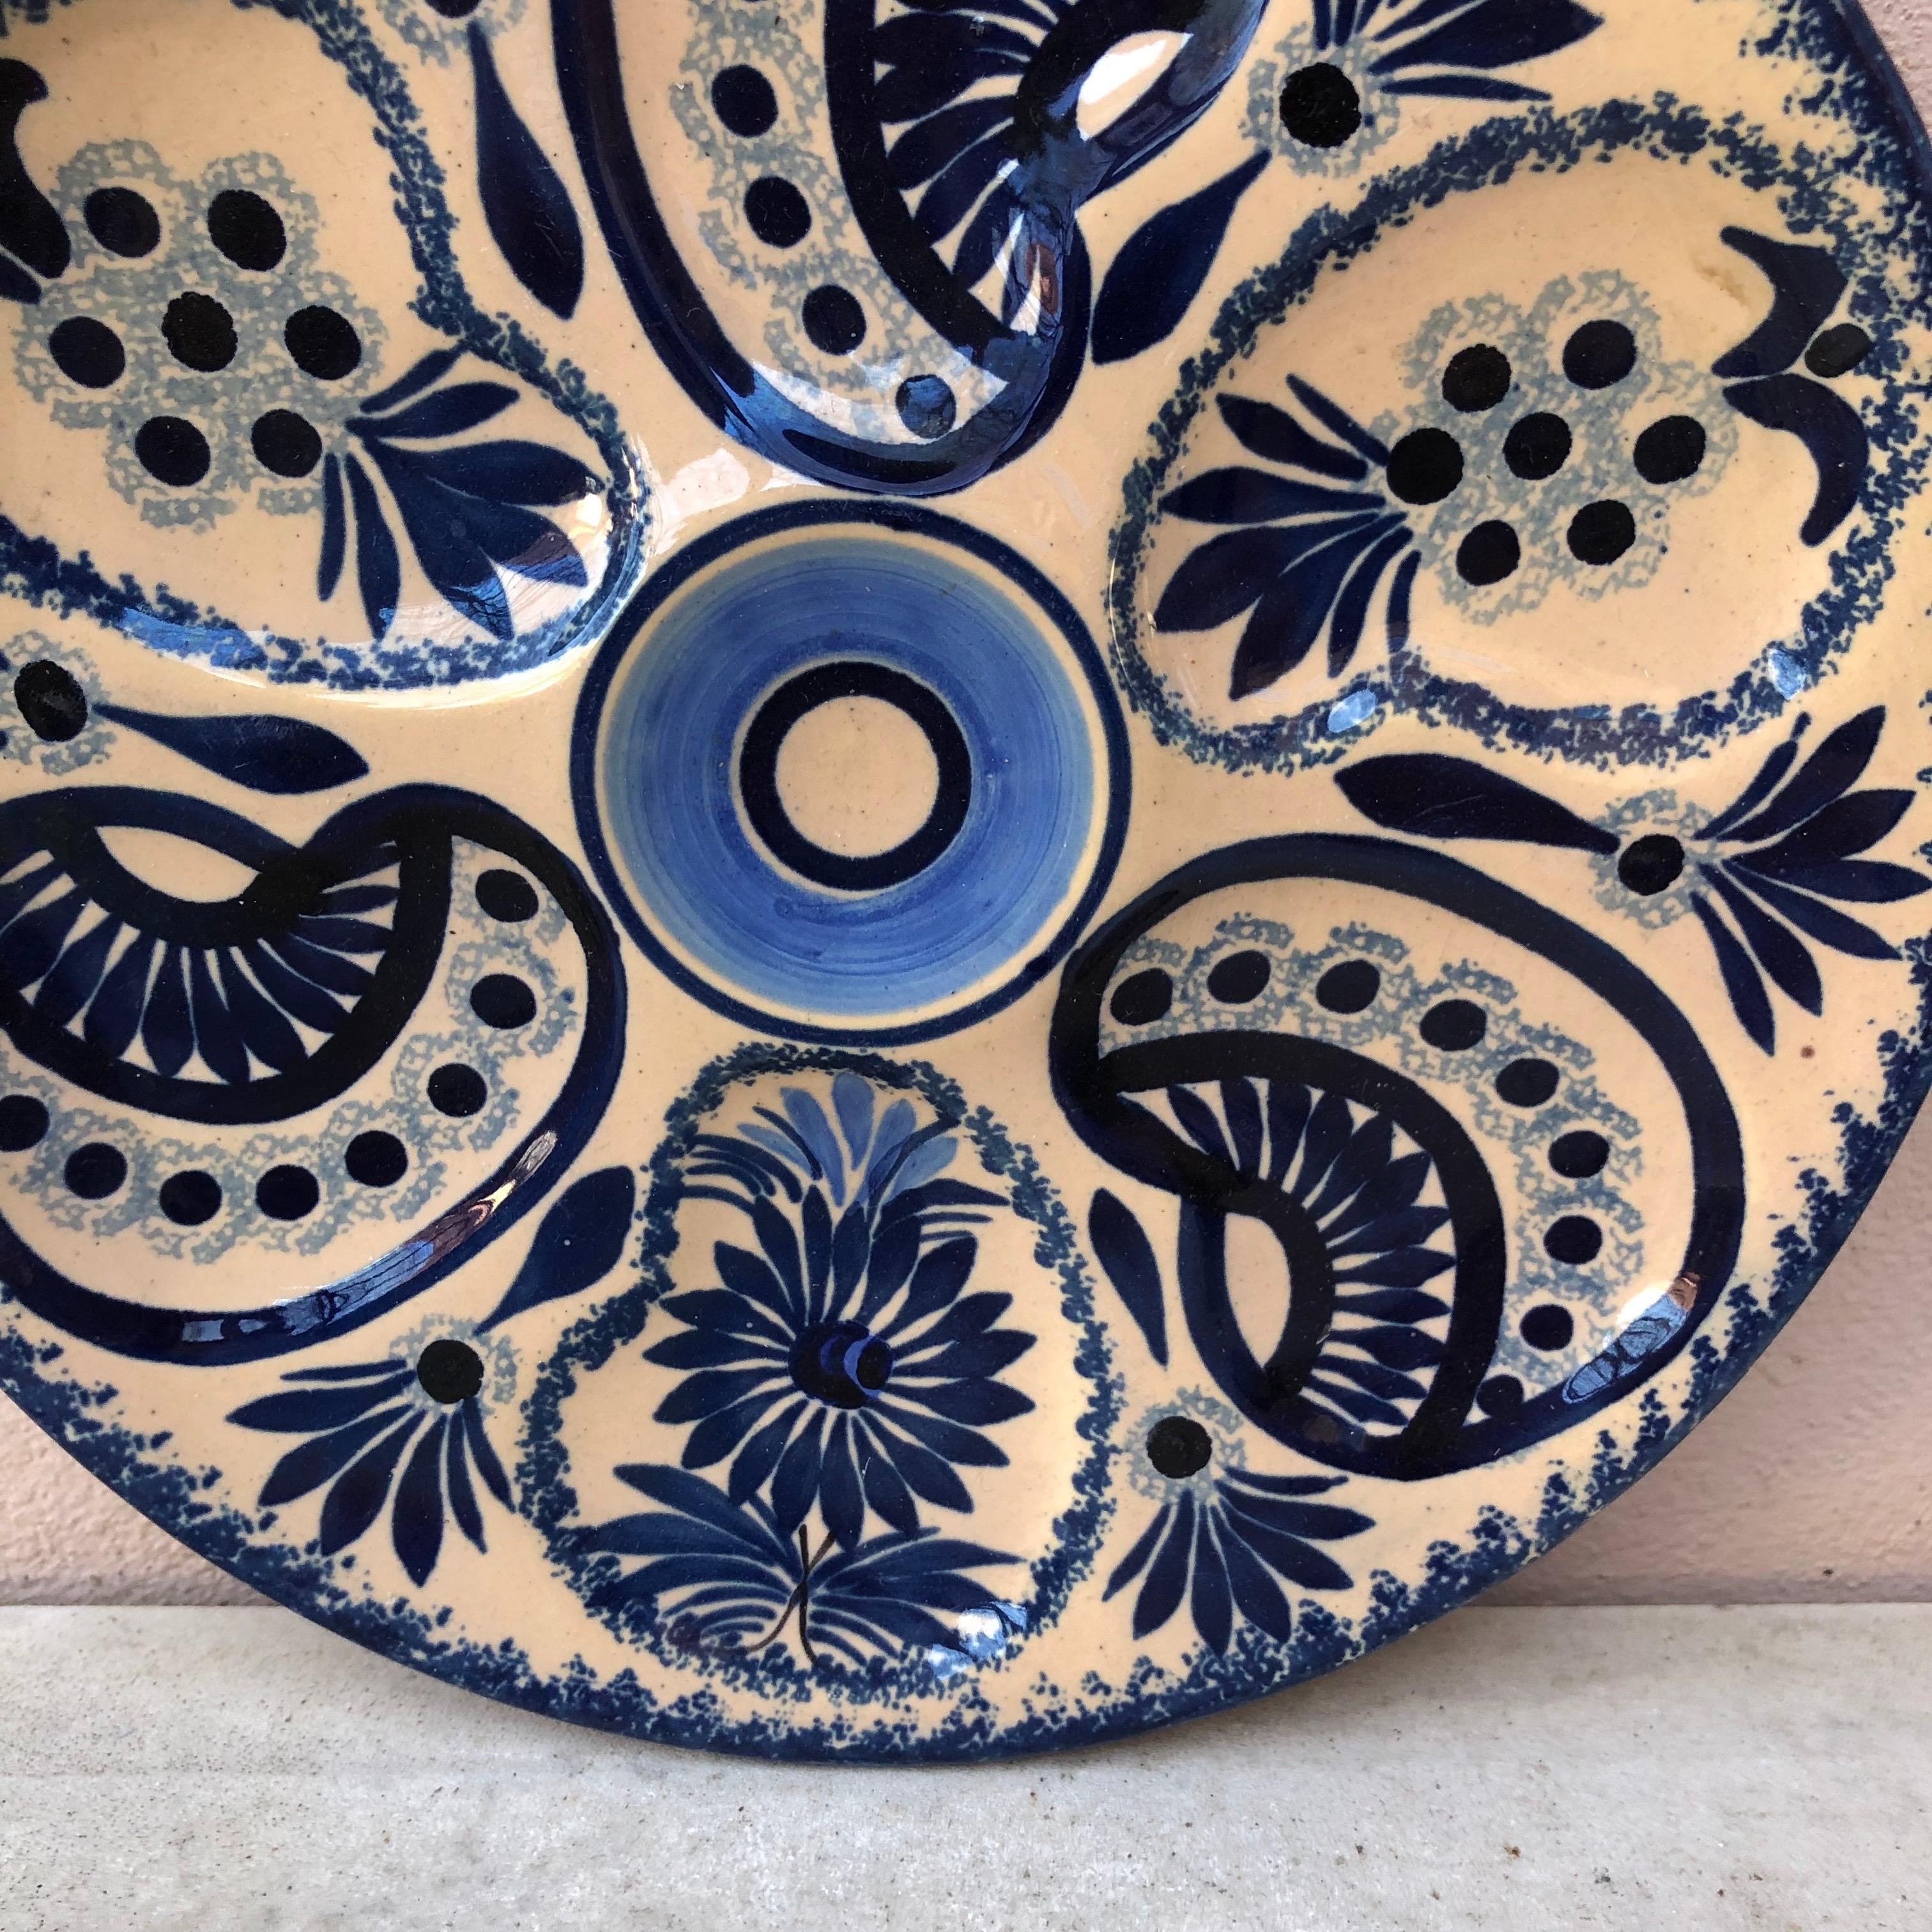 Rustic French Faience Blue & White Oyster Plate Quimper